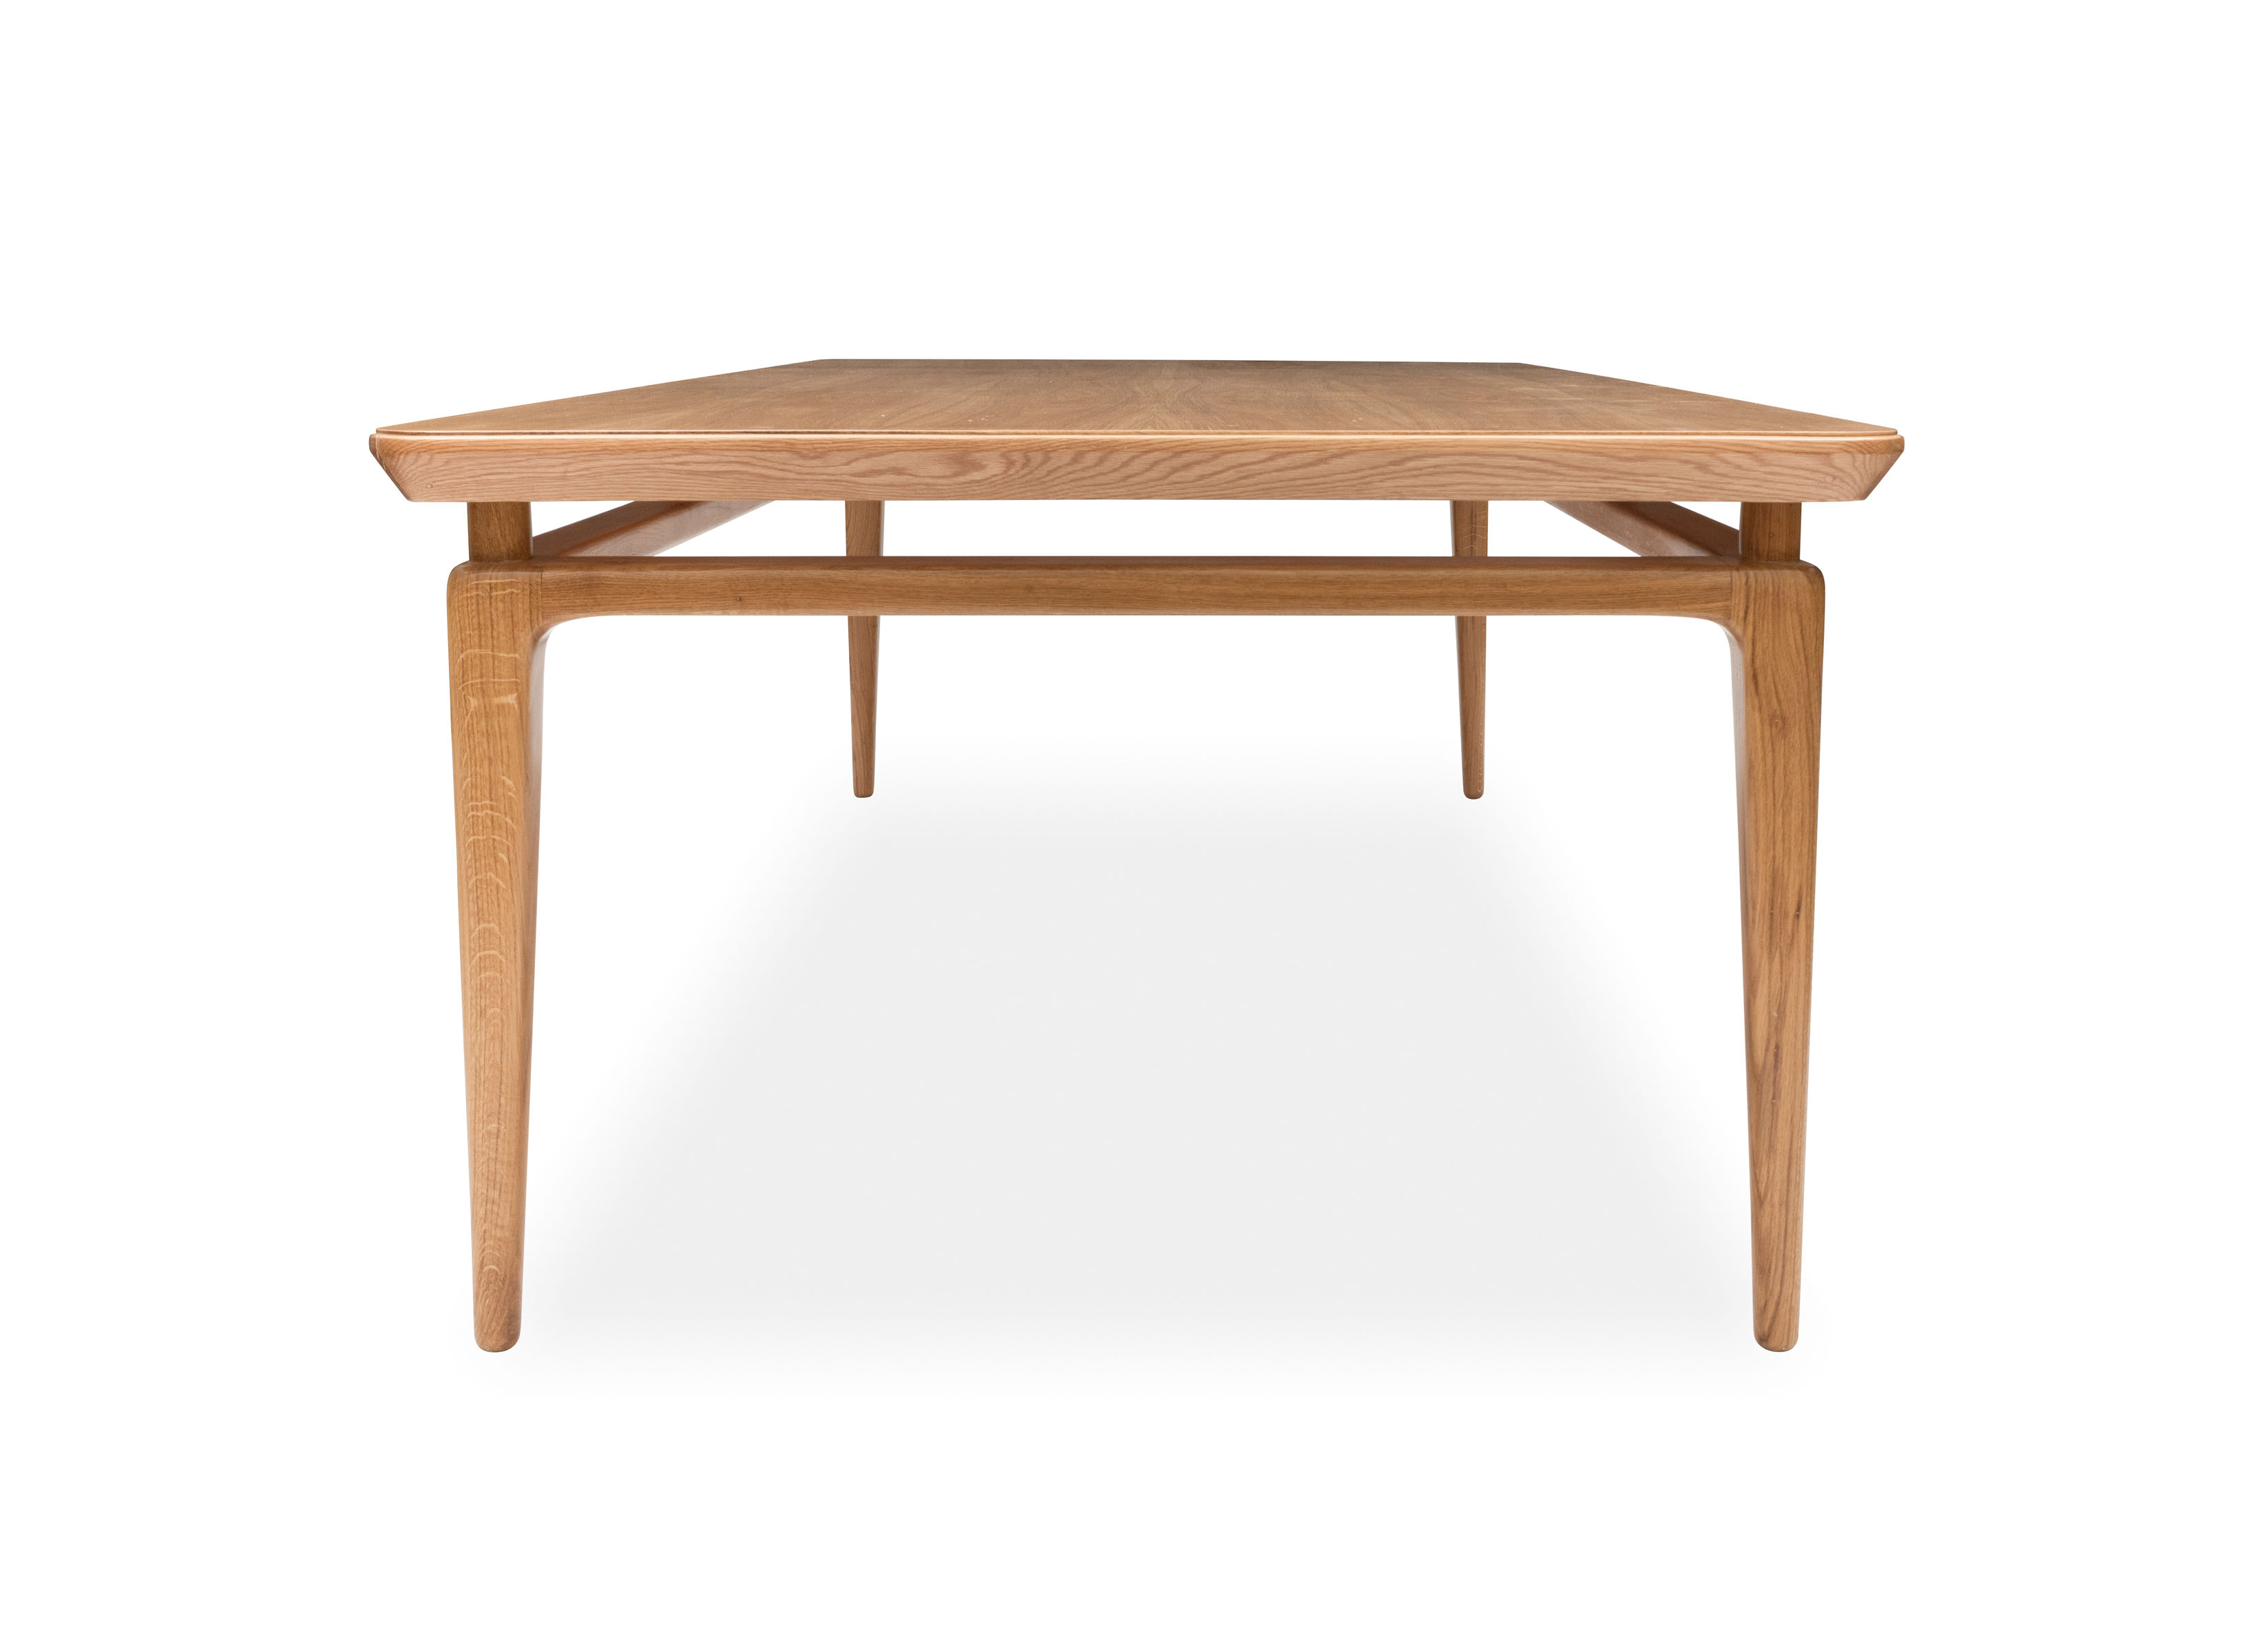 Valorie Dining Table